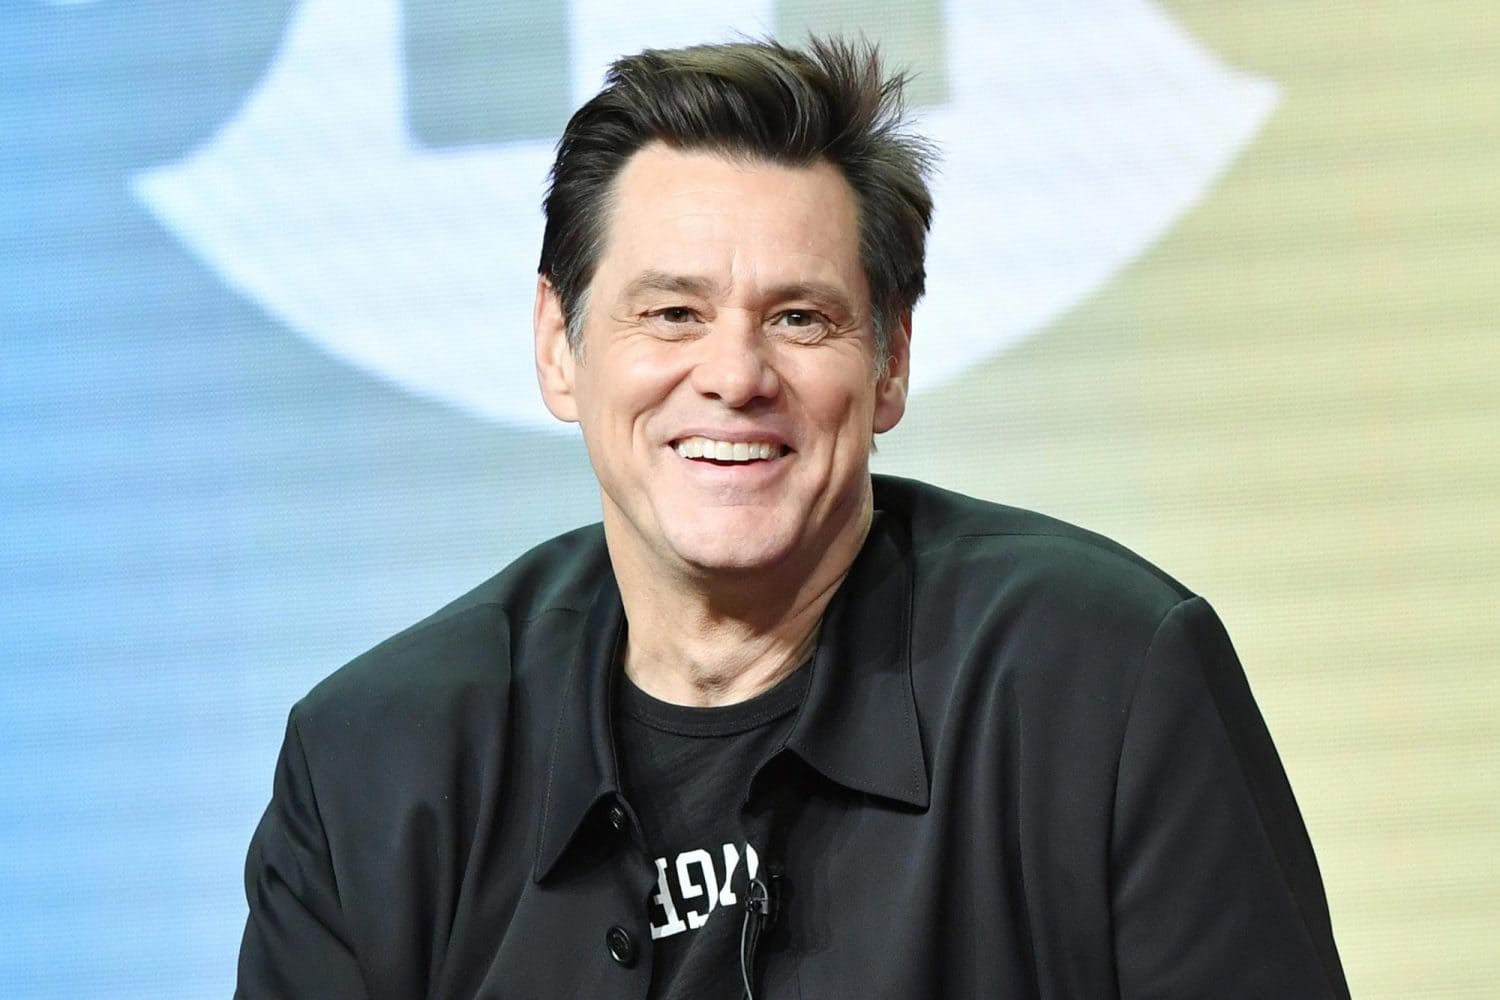 Jim Carrey (Actor) Wiki, Age, Wife, Education, Net Worth & More 9